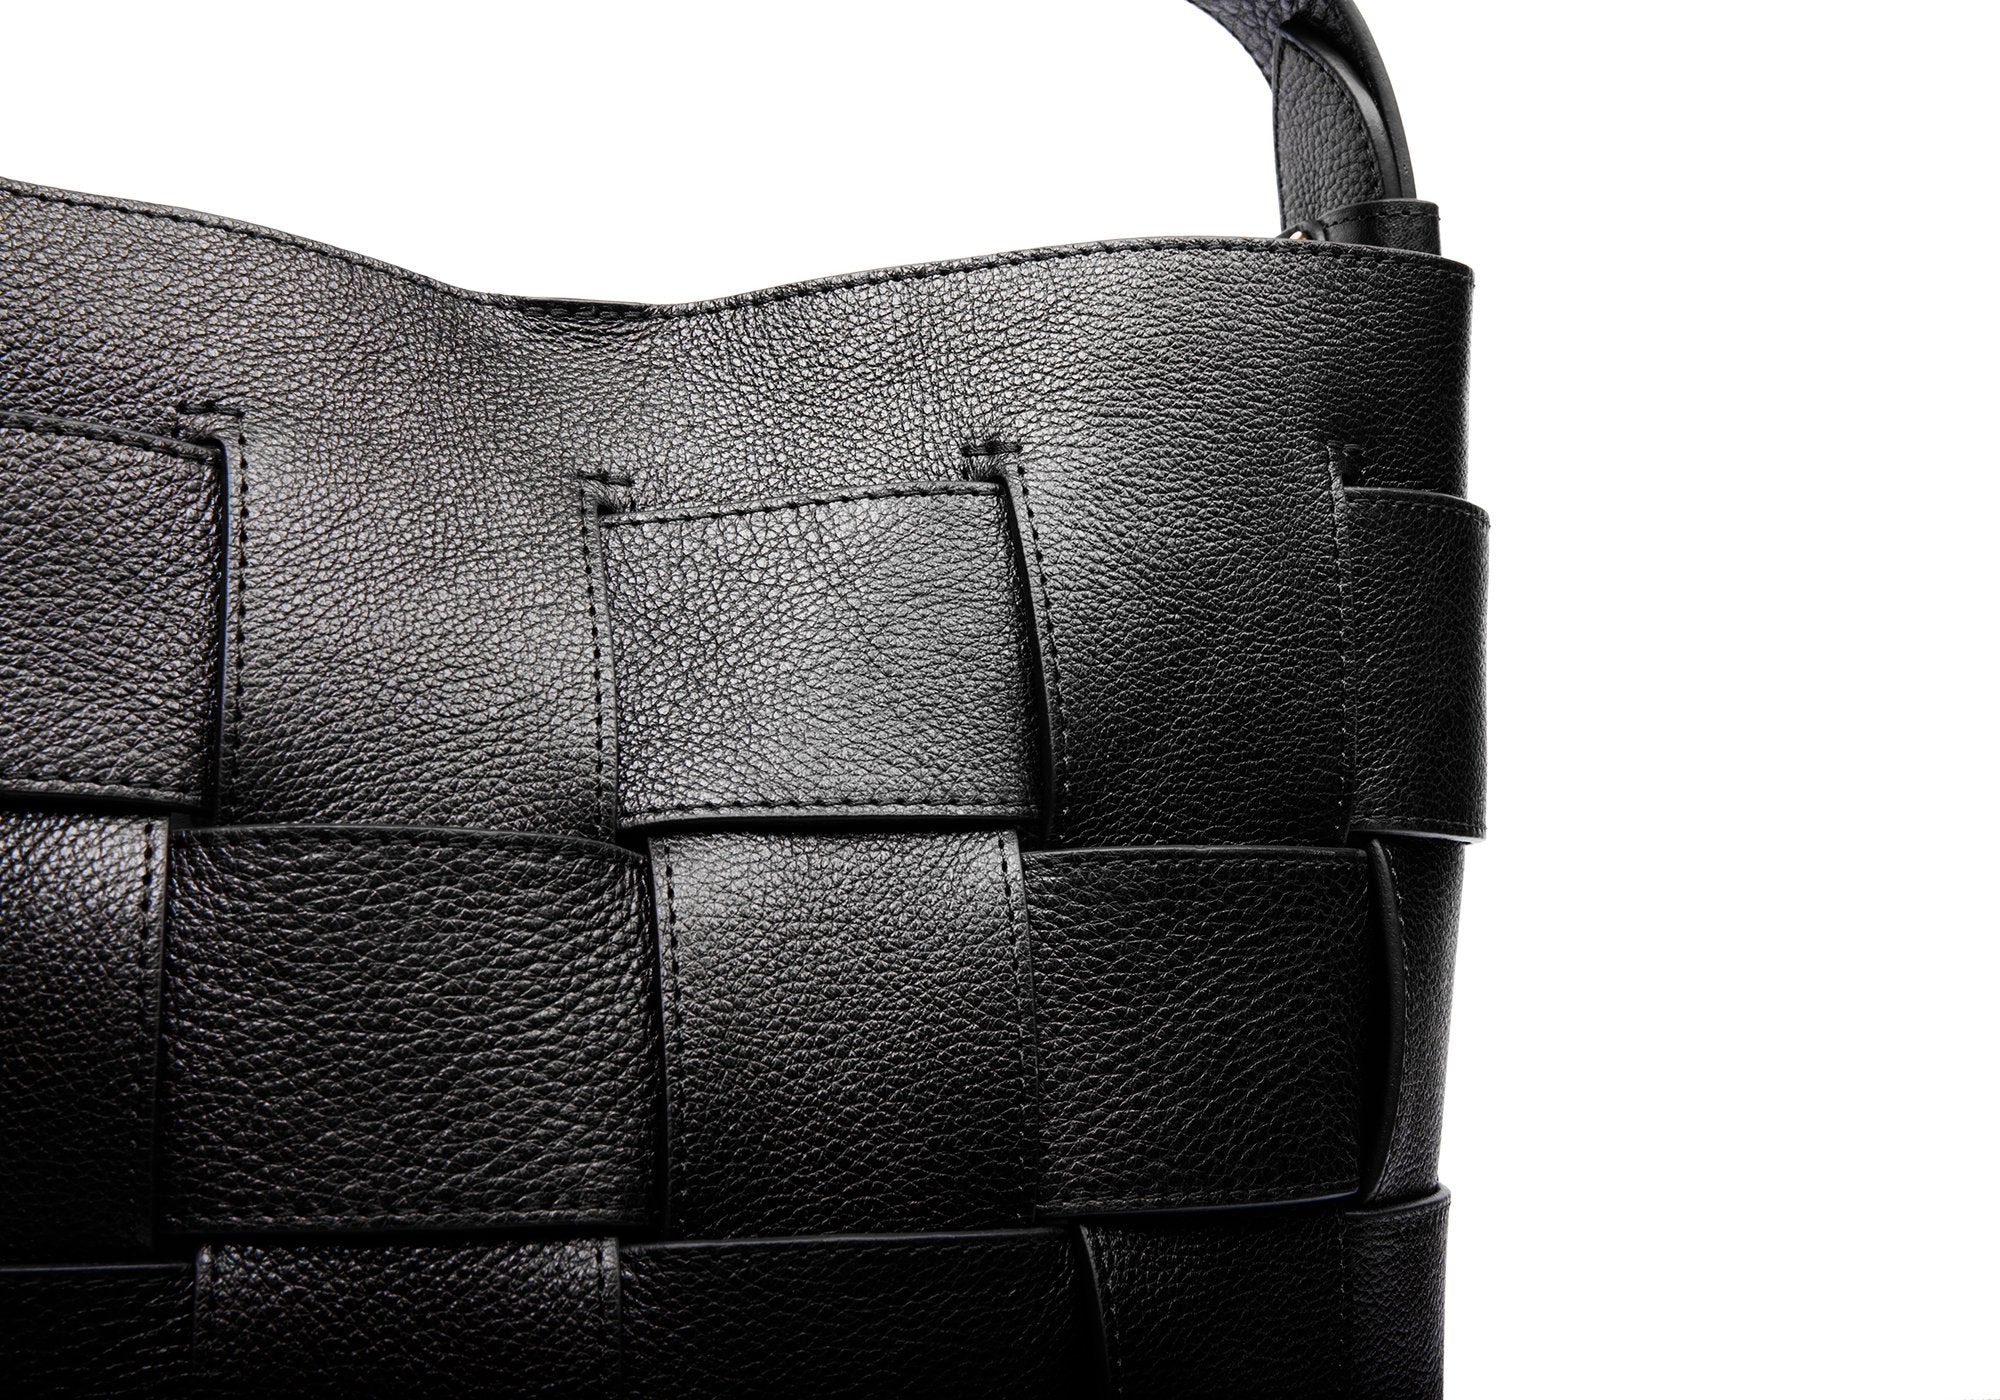 Buy Leather Bags For Women, 100% Genuine Leather